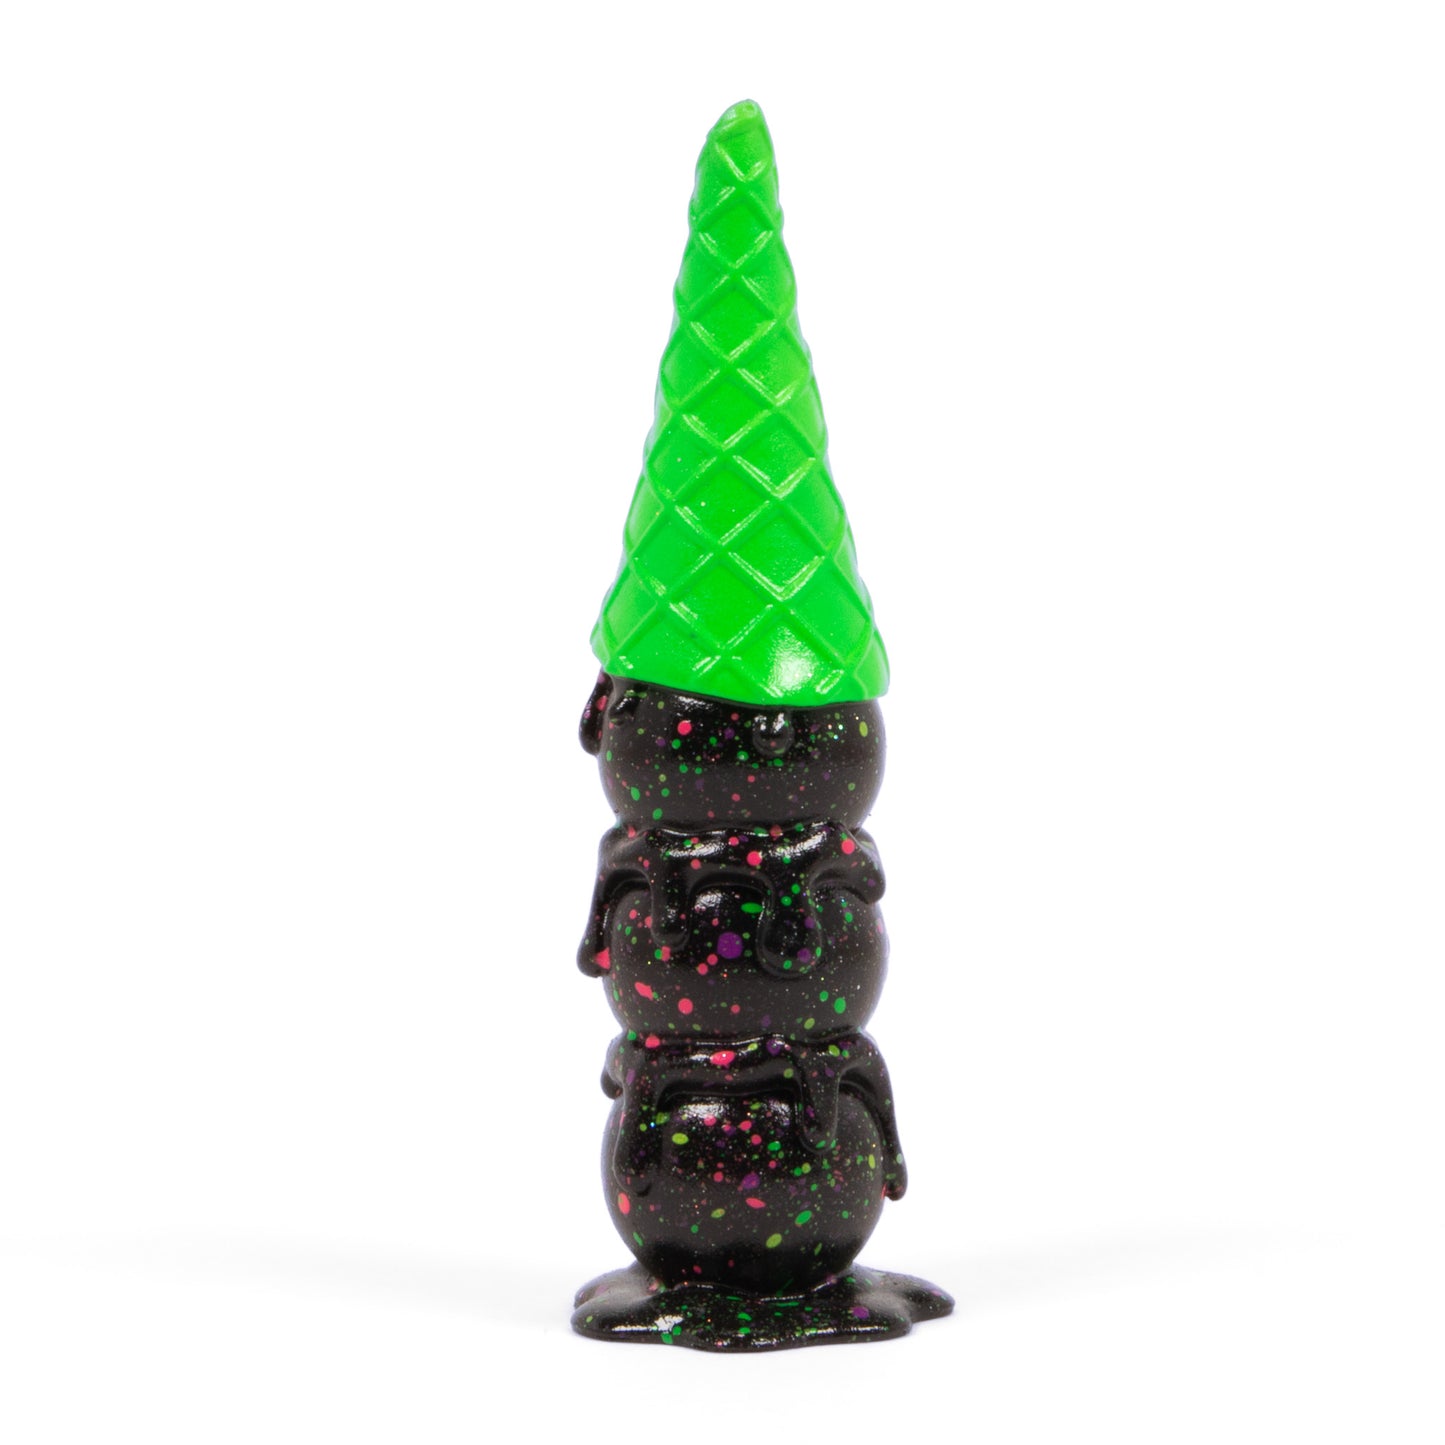 This is Wafull Cosmic Radiation Limited Edition Hand-Painted Resin Figure